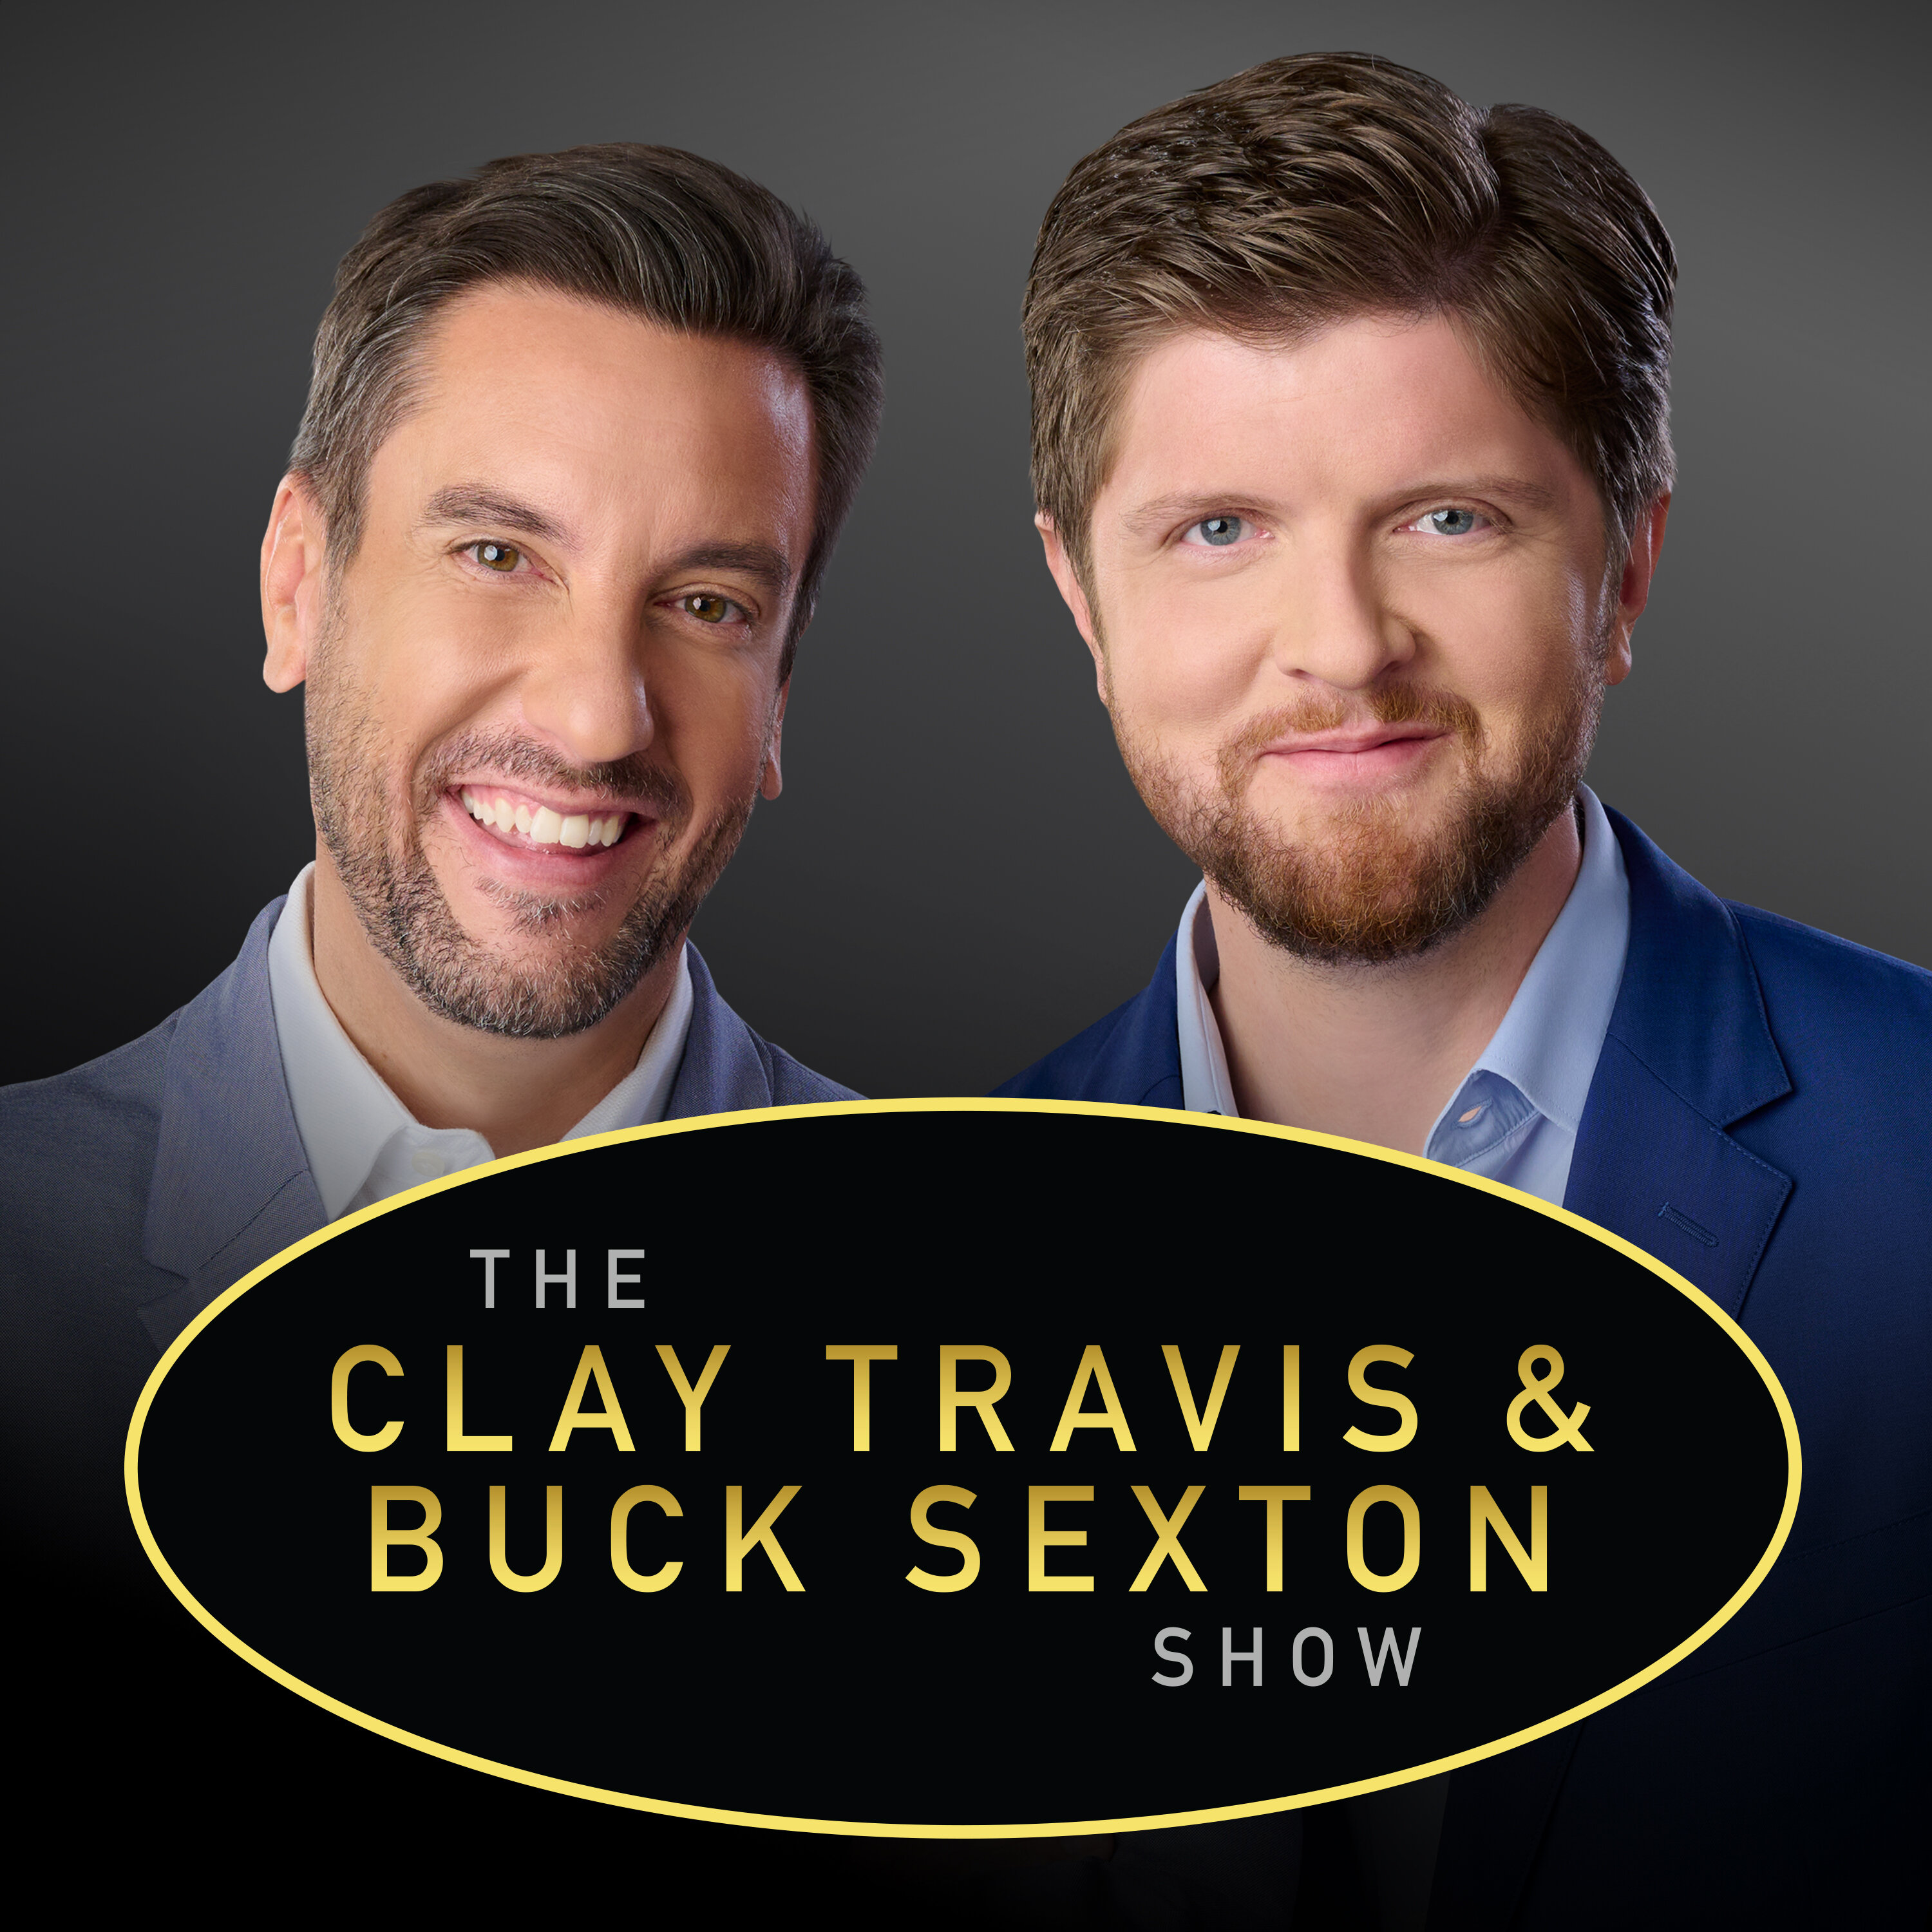 Clay Travis and Buck Sexton Show H1 – Aug 18 2022